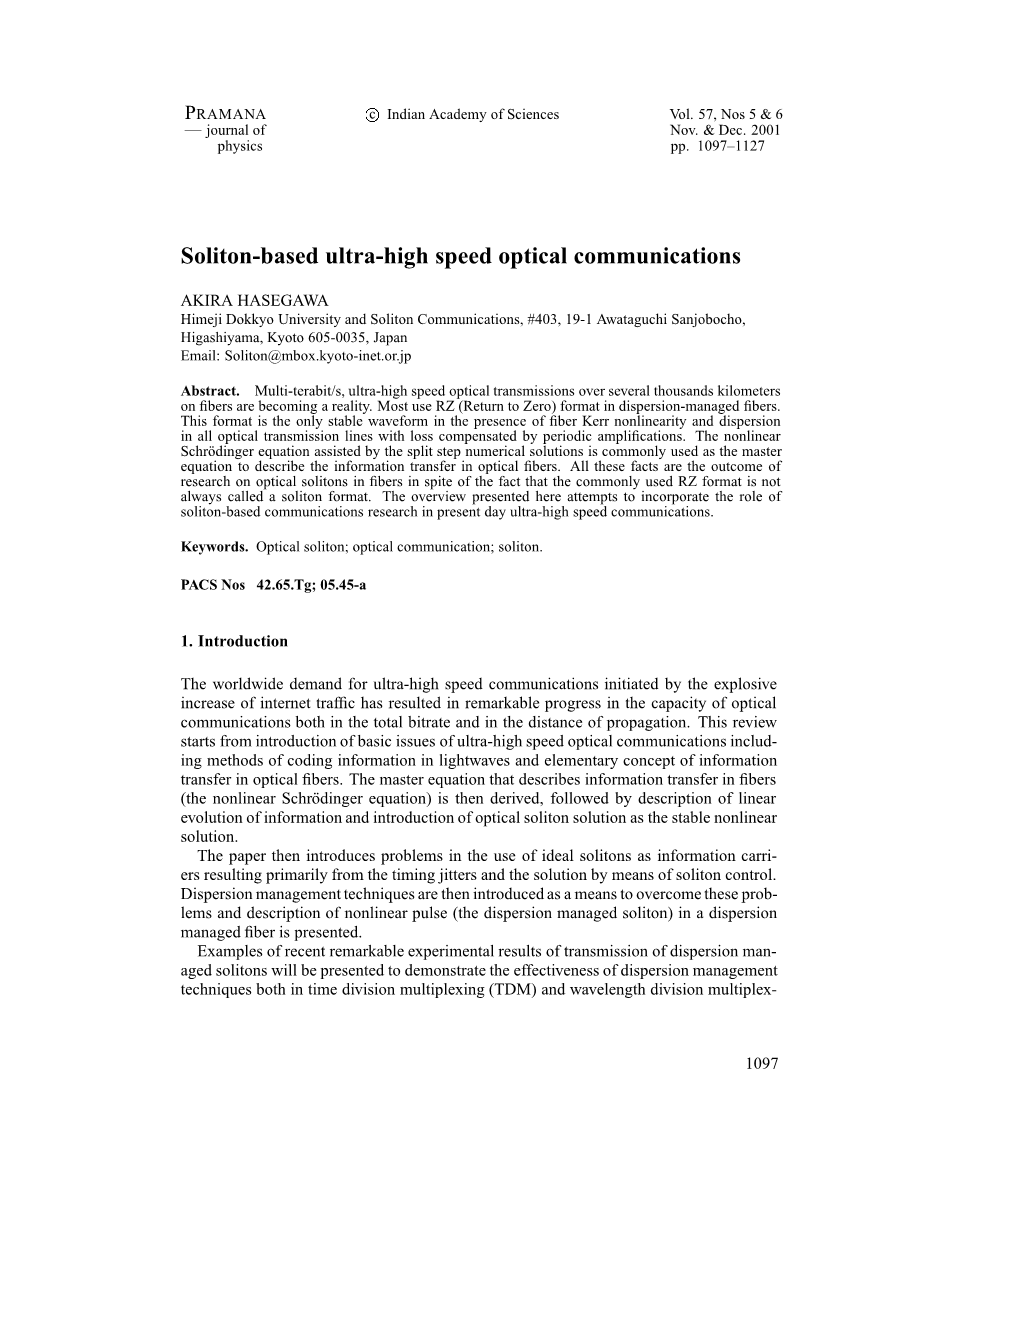 Soliton-Based Ultra-High Speed Optical Communications